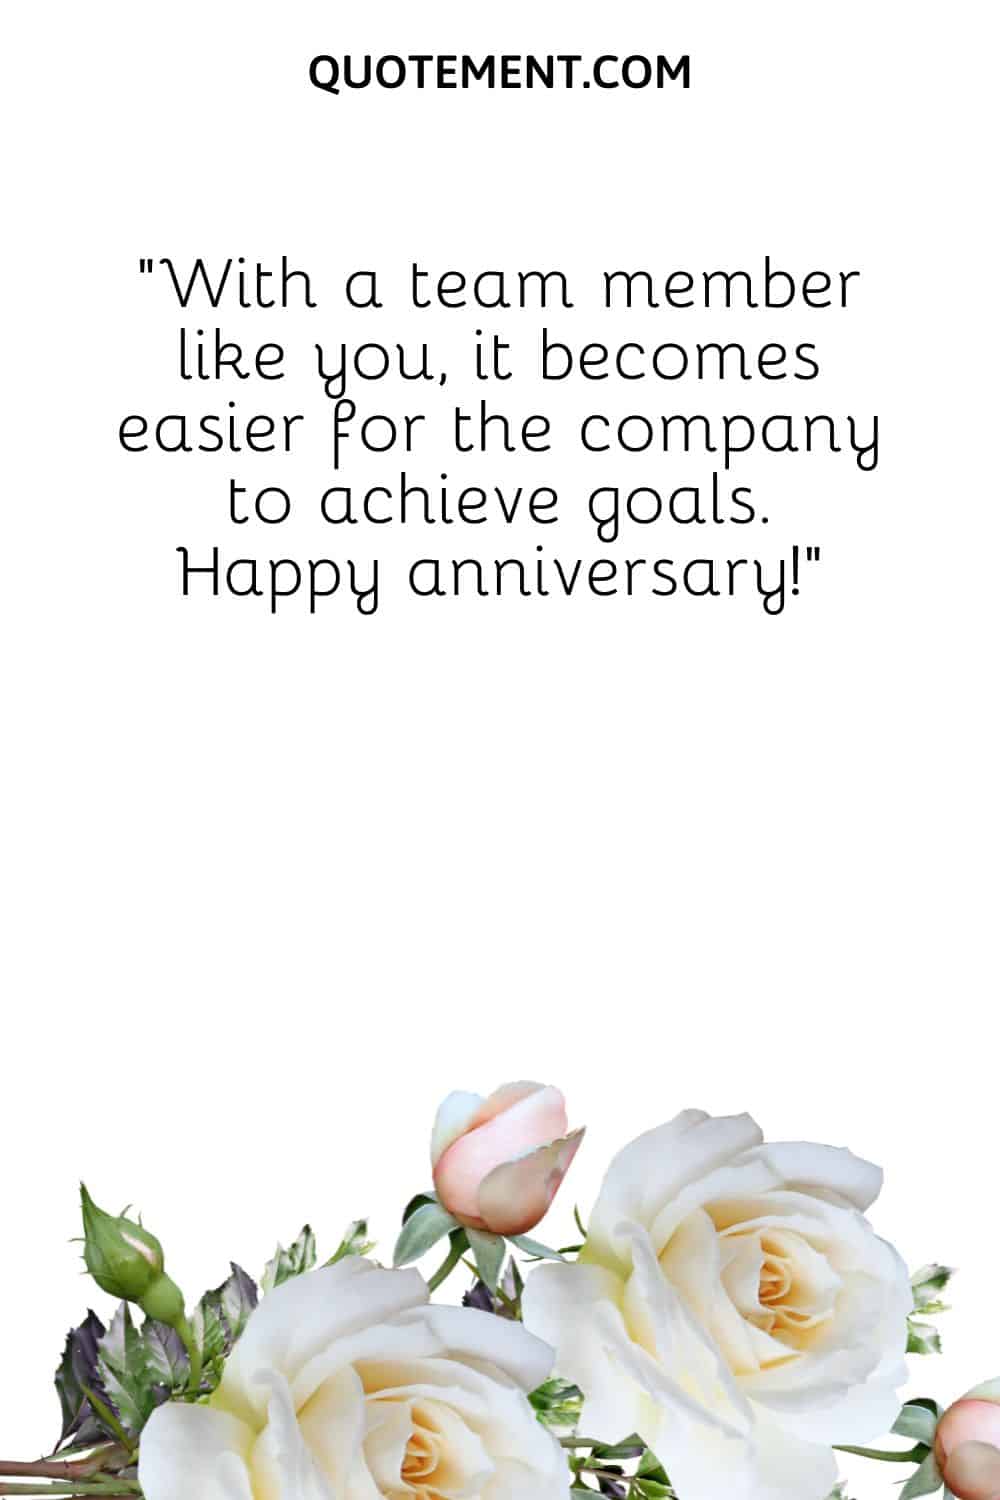 “With a team member like you, it becomes easier for the company to achieve goals. Happy anniversary!”